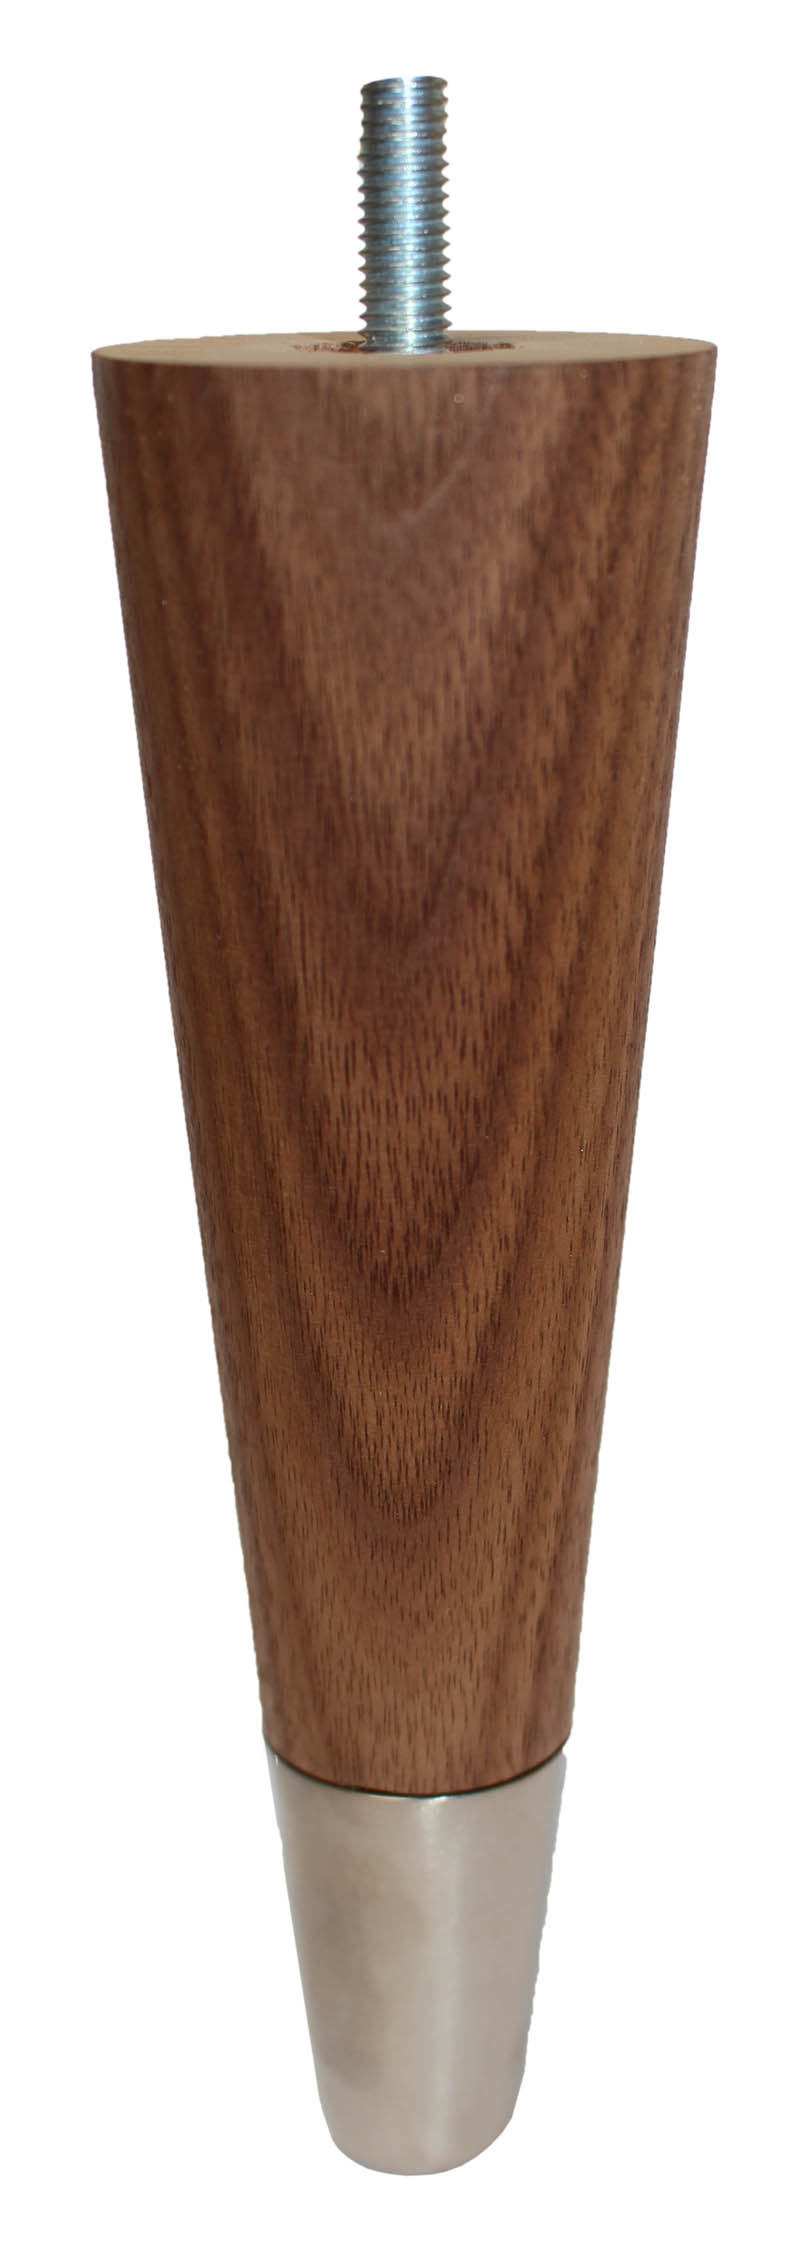 Andrea Solid Walnut Tapered Furniture Legs - Natural Oiled Finish - Brushed Chrome Slipper Cups - Set of 4